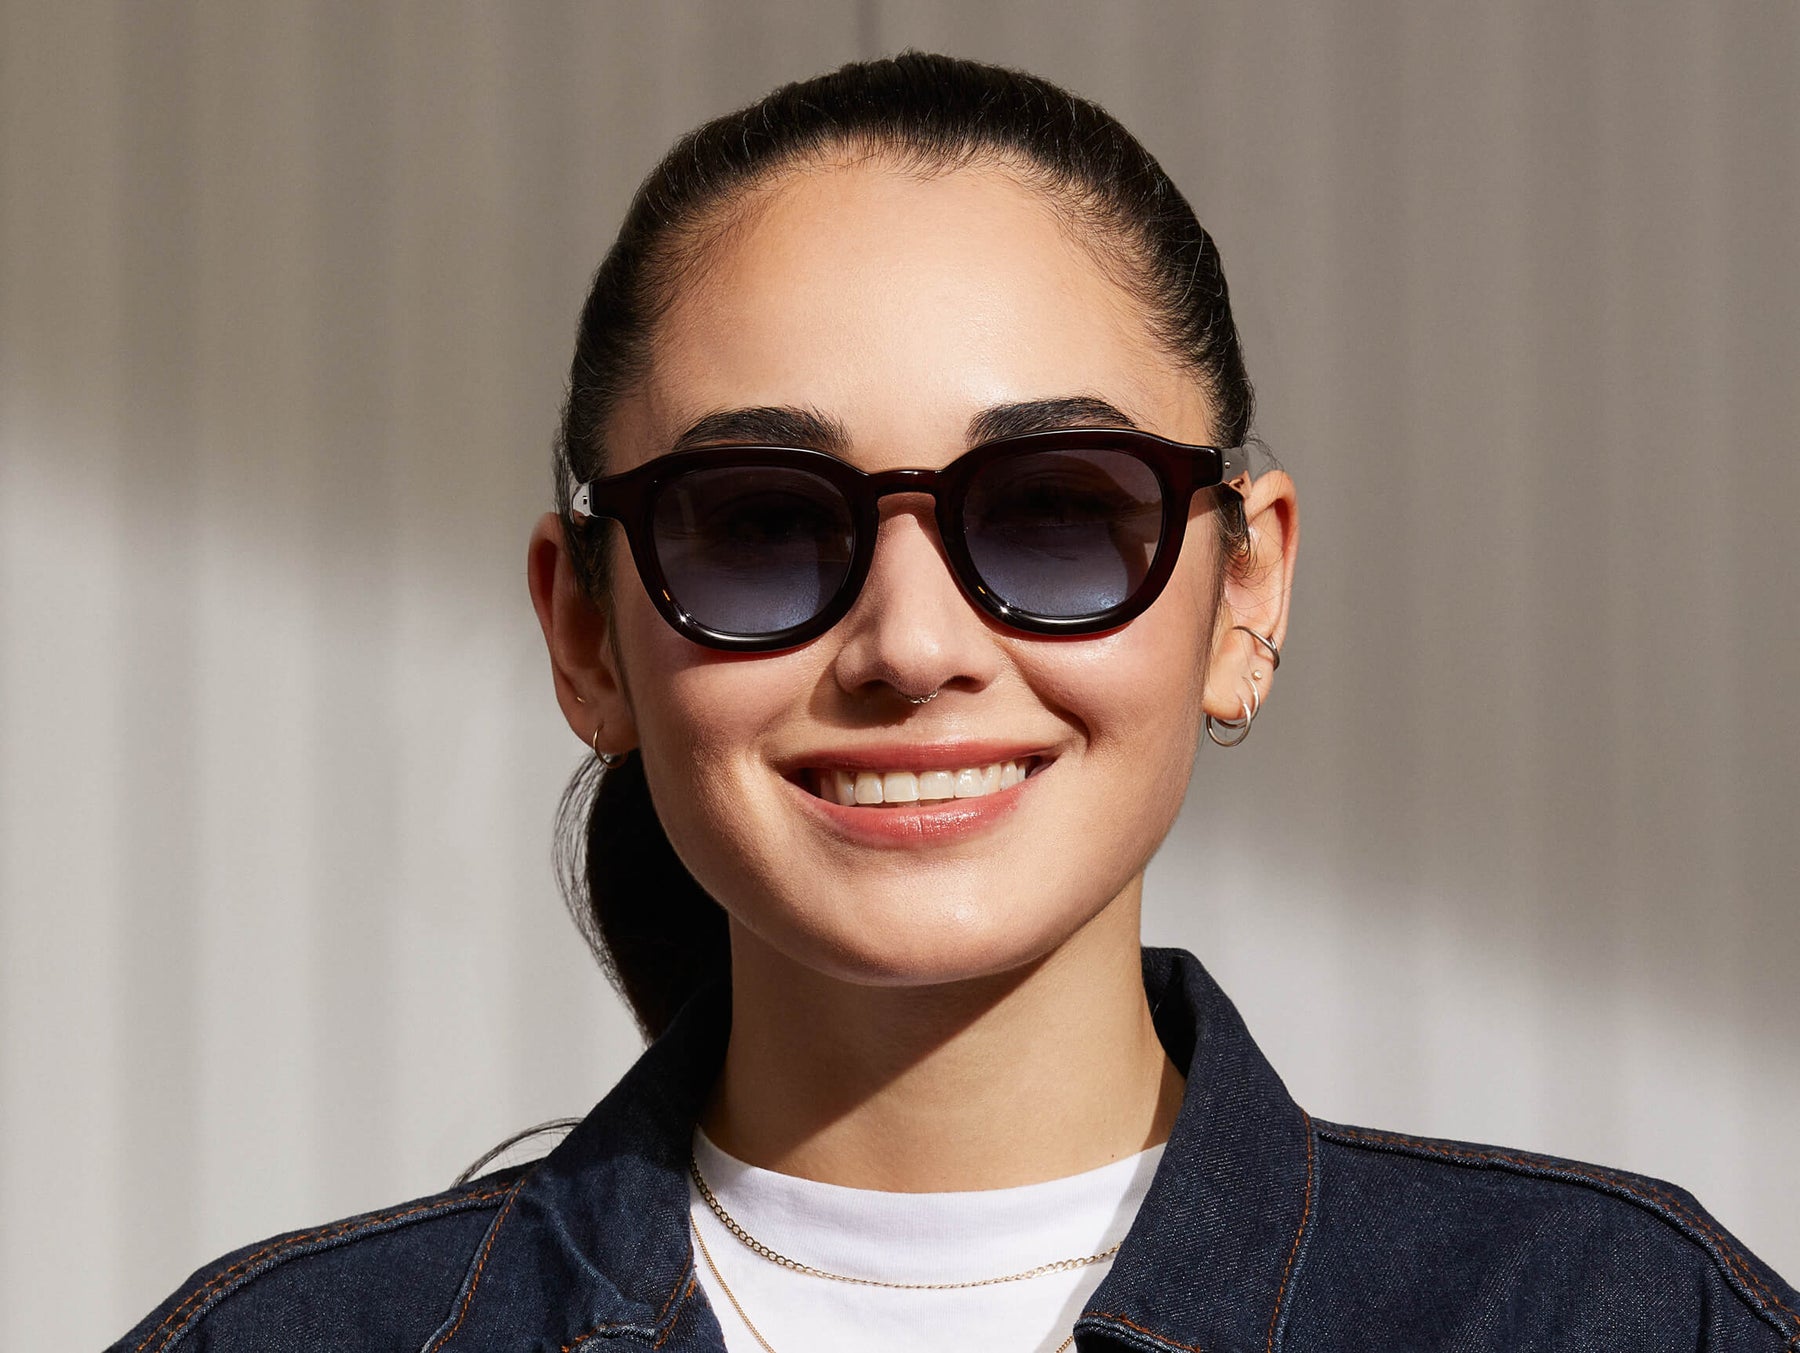 Model is wearing The DAHVEN in Burgundy in size 47 with Denim Blue Tinted Lenses